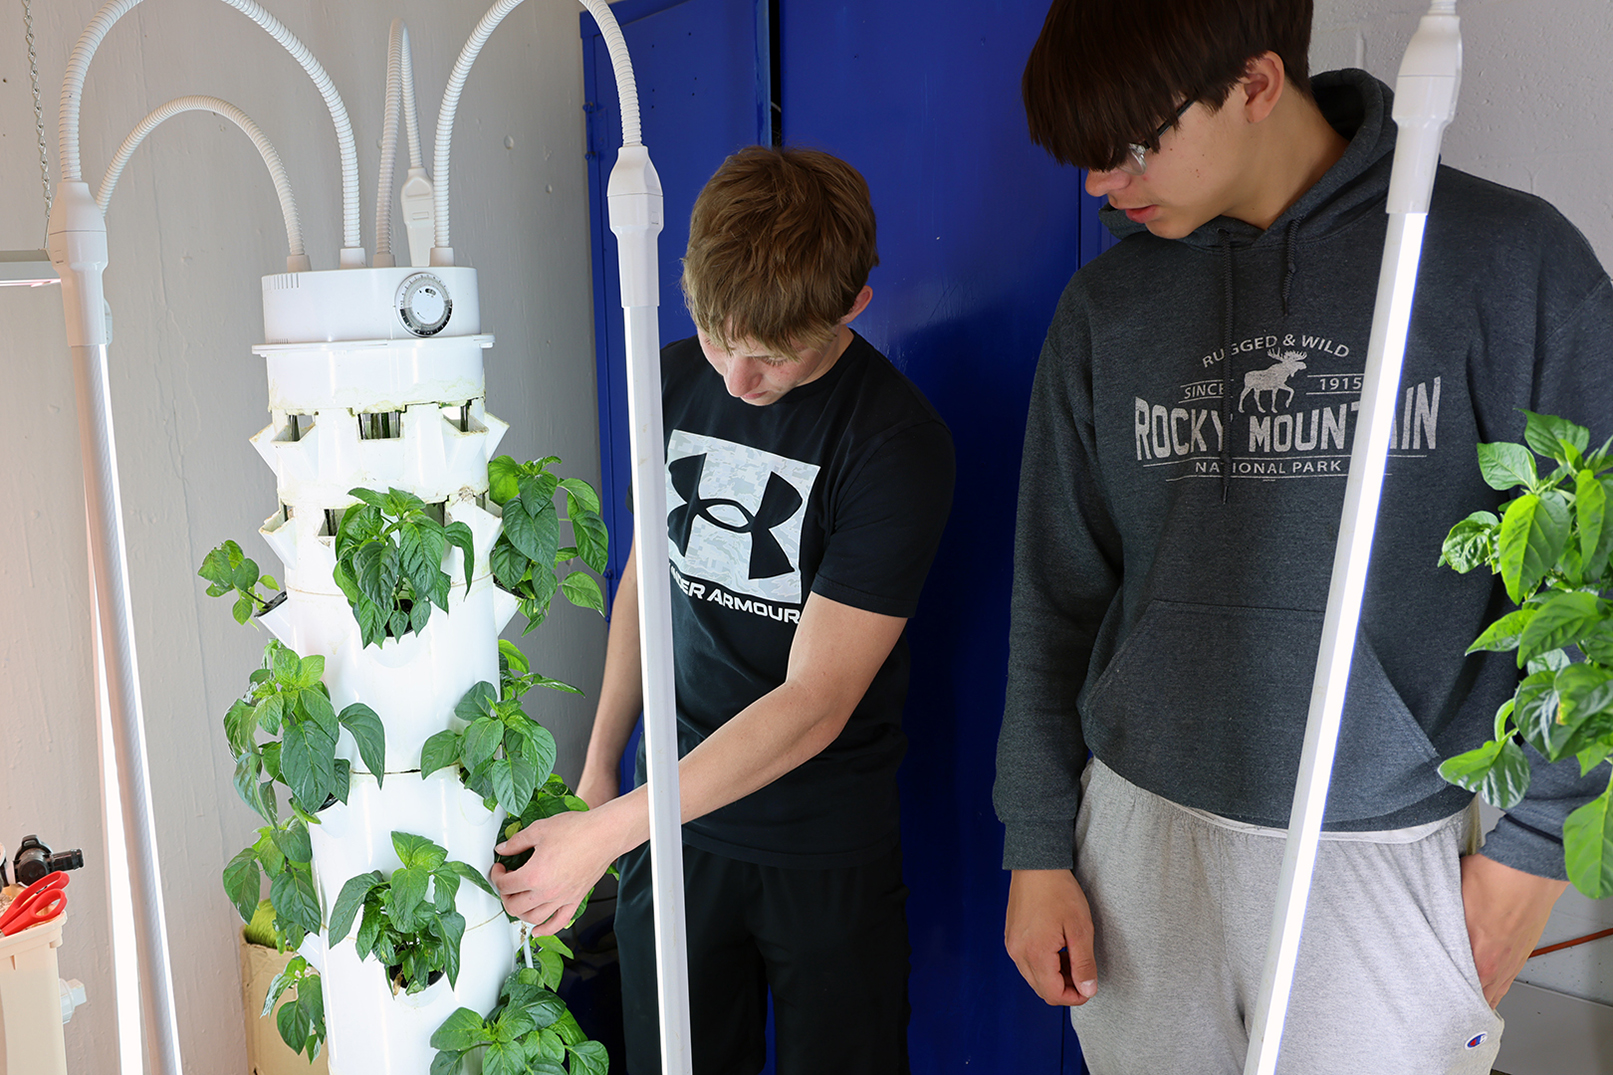 Students grow bell peppers in a hydroponic growing tower at Southern High School in Wymore.